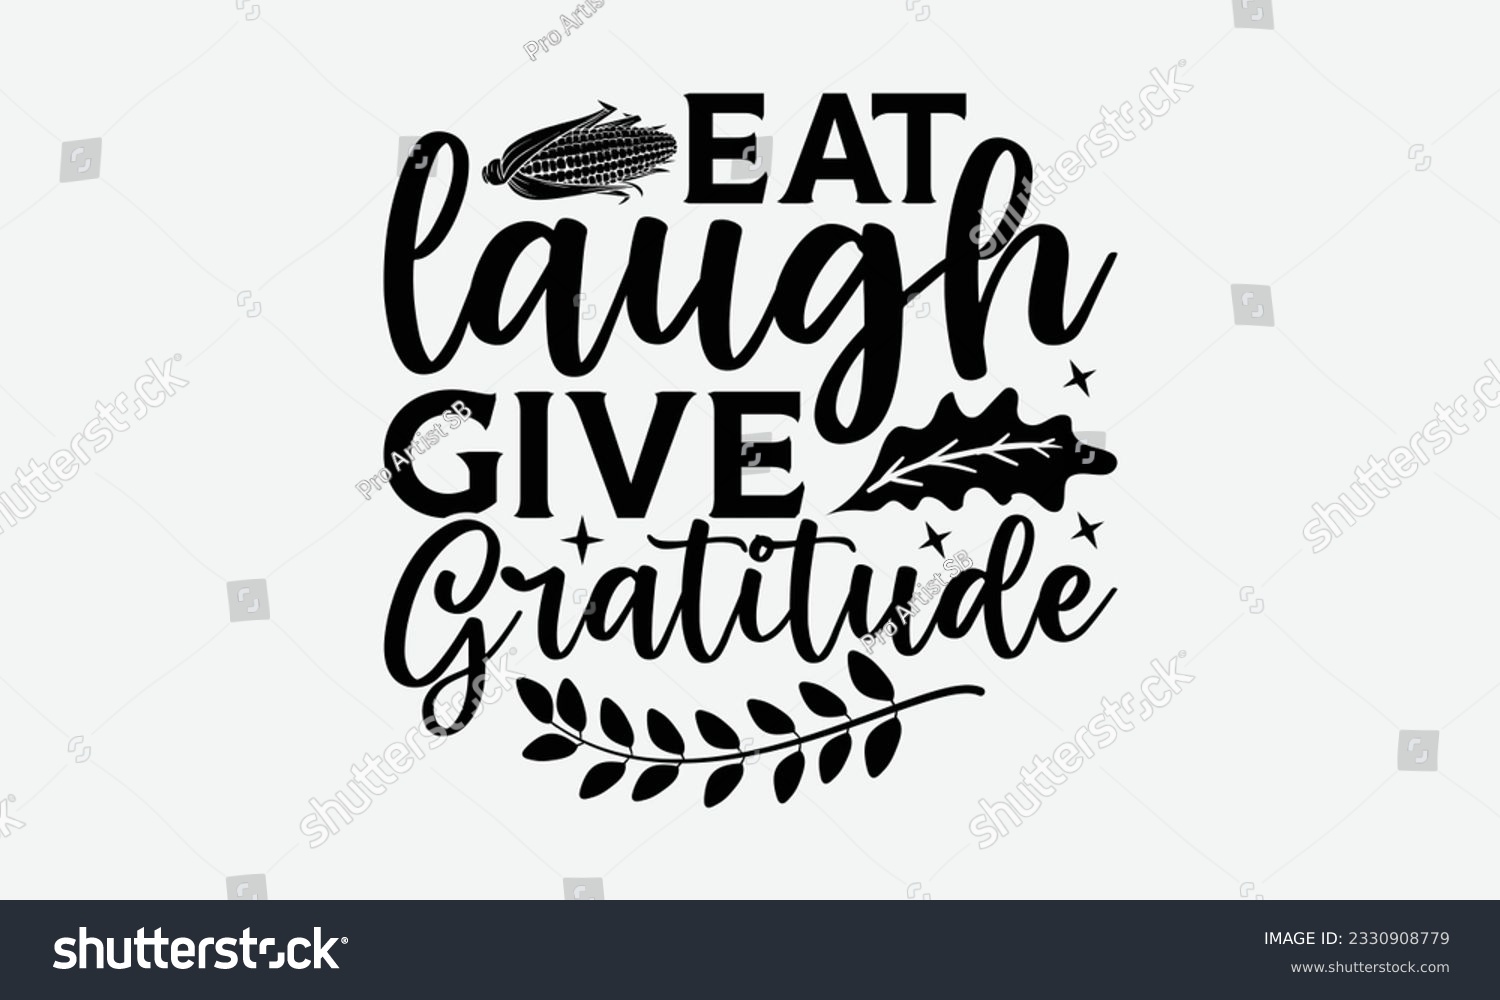 SVG of Eat Laugh Give Gratitude - Thanksgiving T-shirt Design Template, Happy Turkey Day SVG Quotes, Hand Drawn Lettering Phrase Isolated On White Background. svg